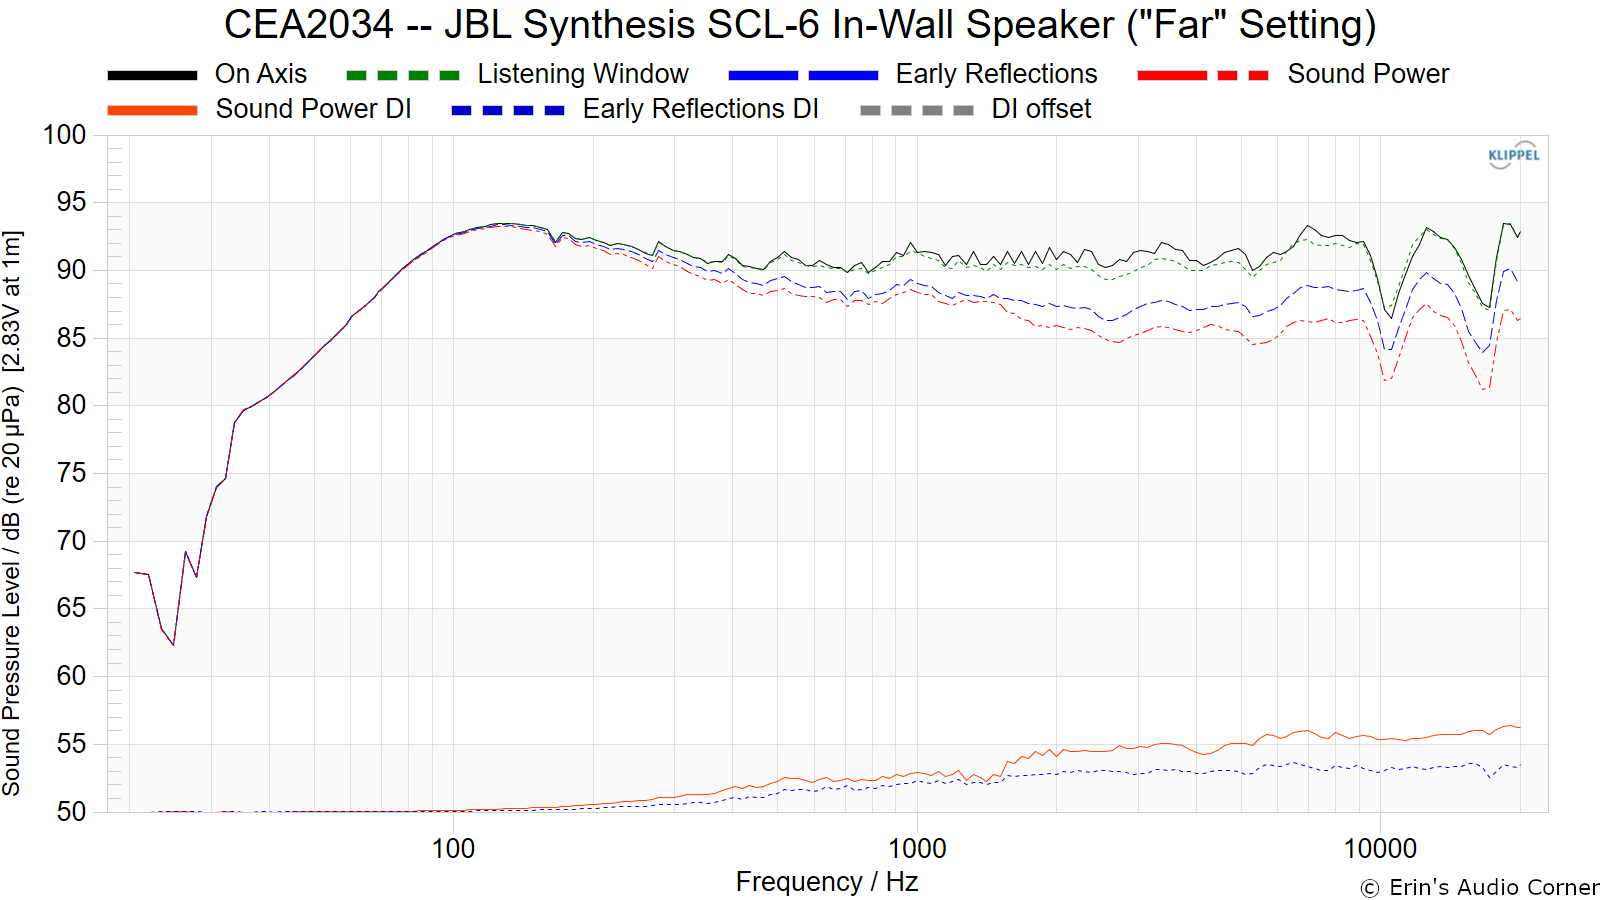 CEA2034%20--%20JBL%20Synthesis%20SCL-6%20In-Wall%20Speaker%20%28Far%20Setting%29.png